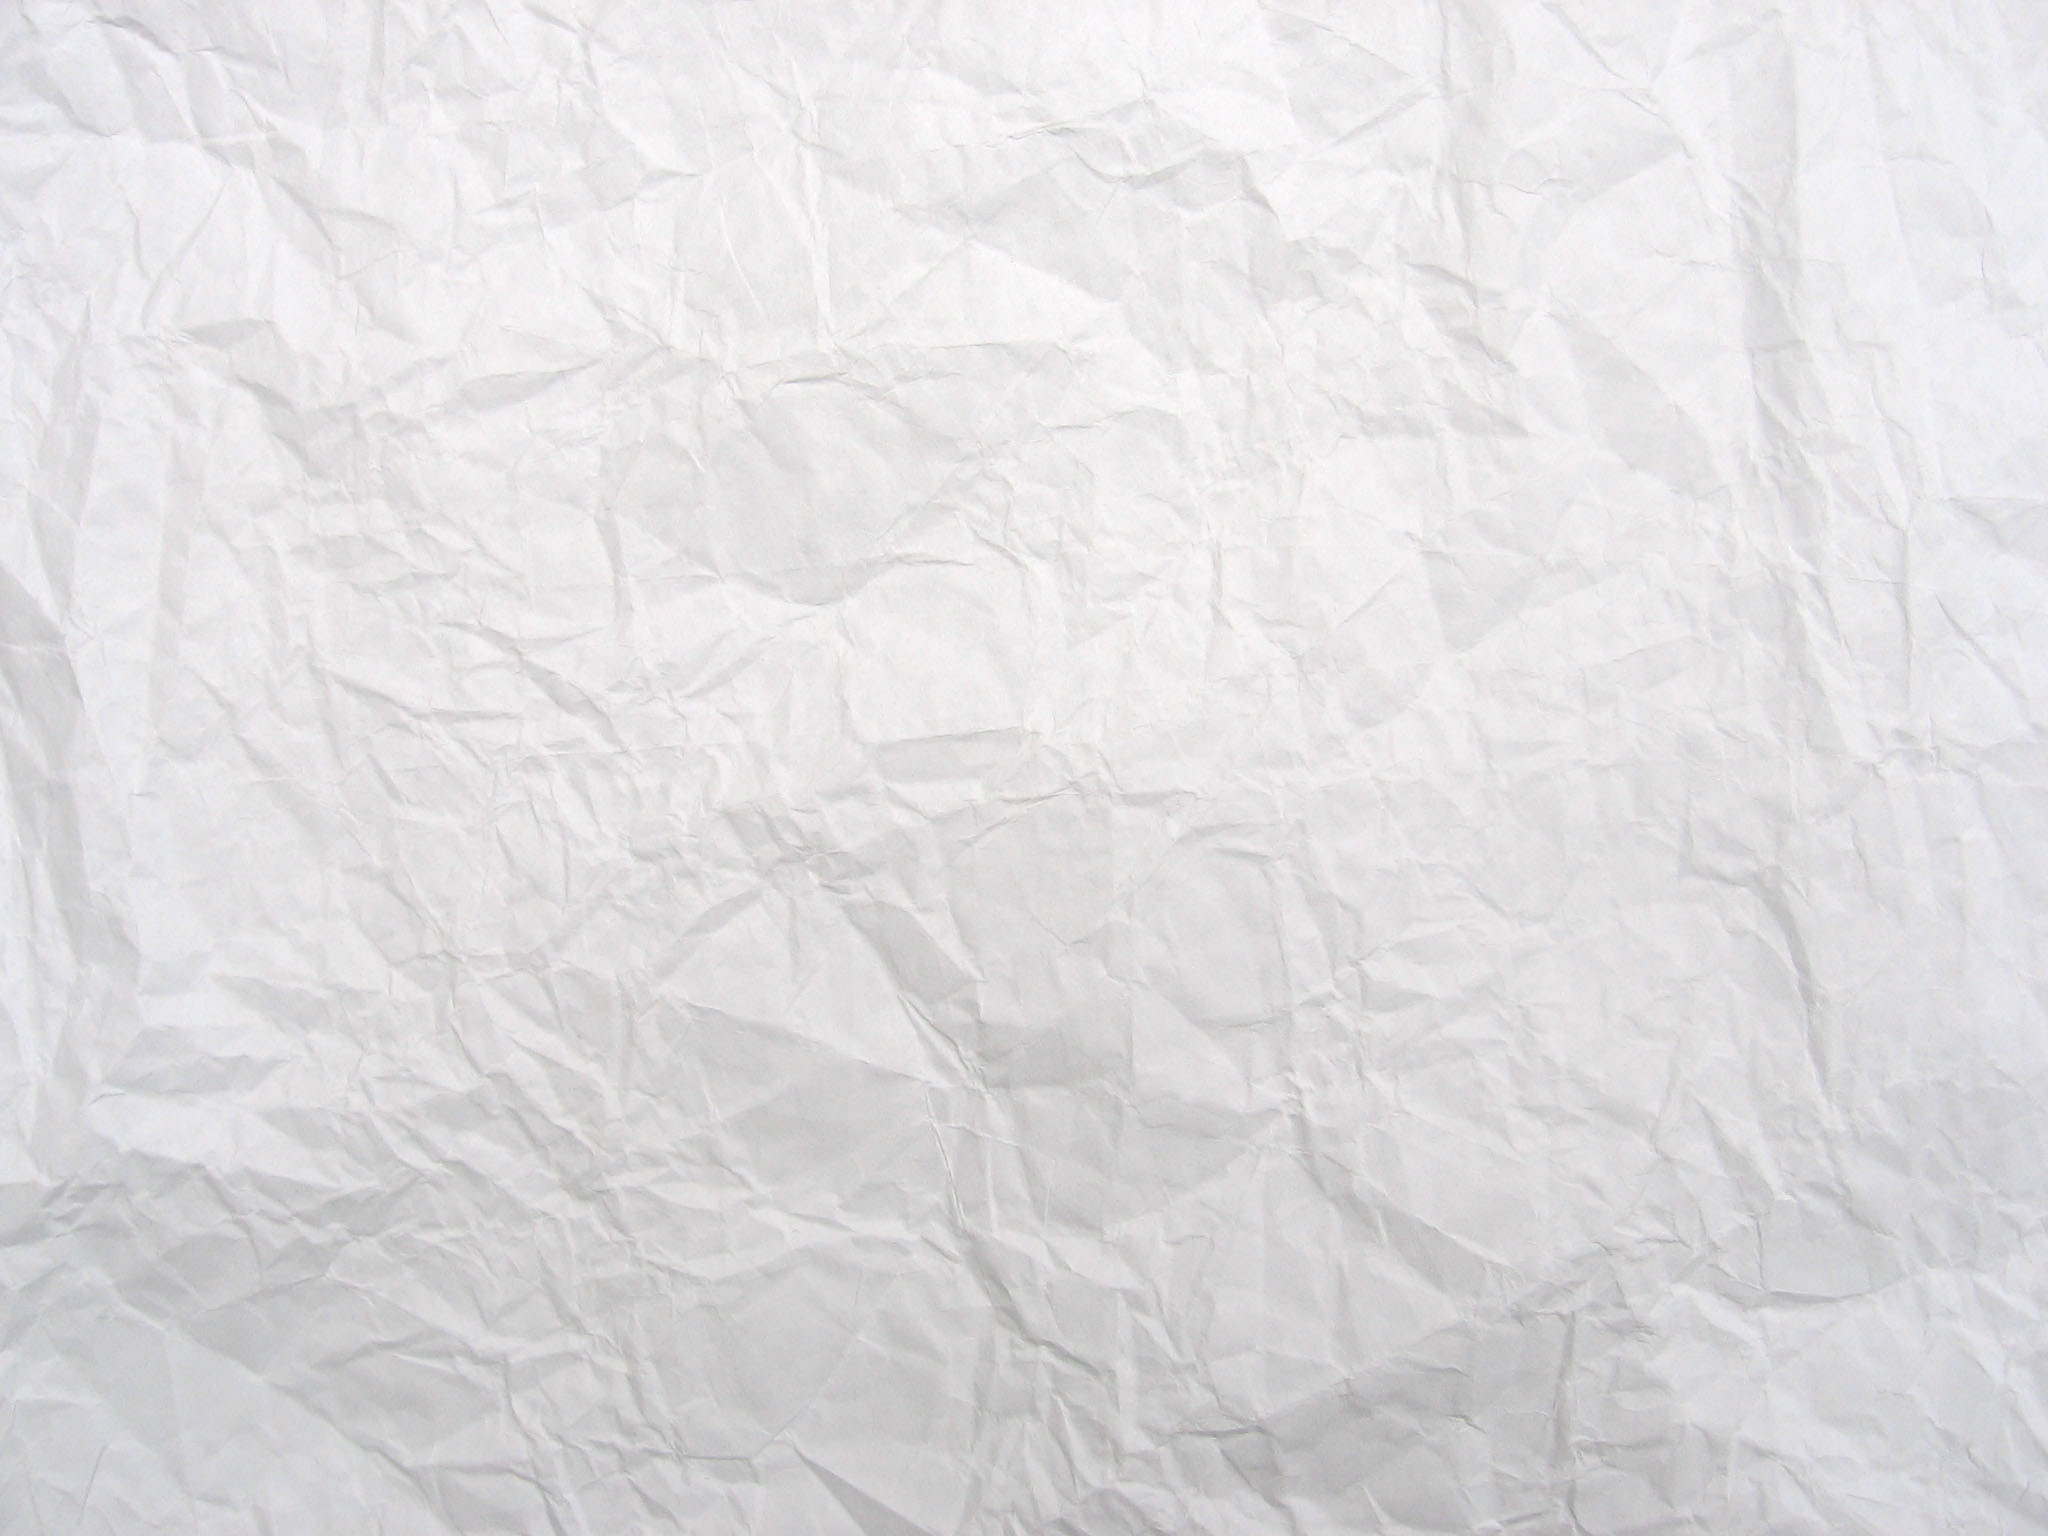 2048x1536 a paper structure, paper texture, the old rumpled paper to download a  photo,. Wrinkled PaperCrumpled PaperTextured WallpaperWhite ...